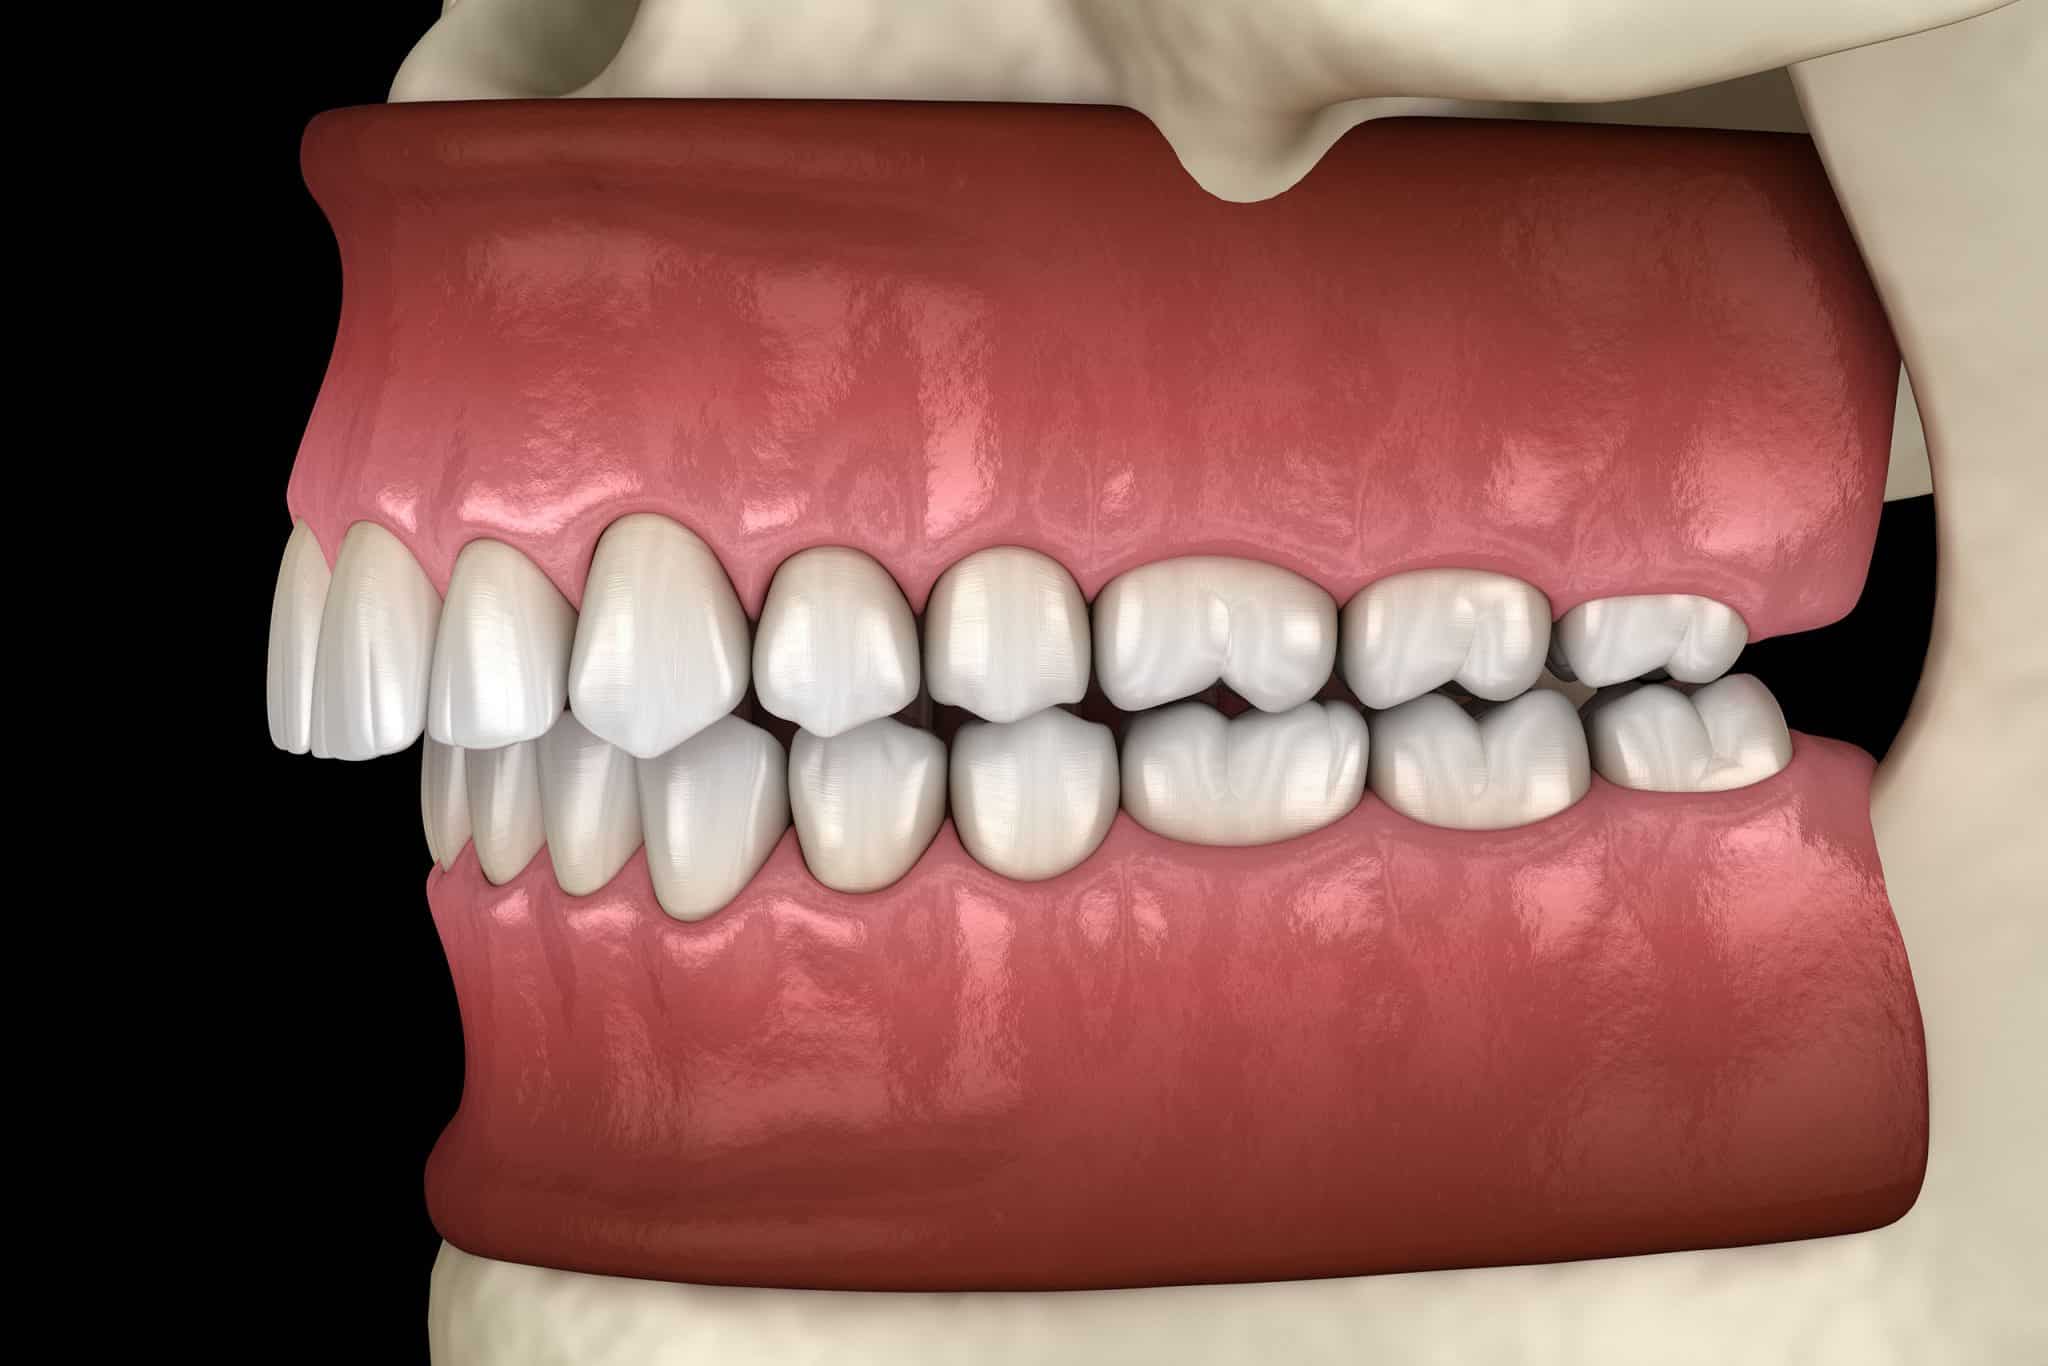 A rendering of an overbite